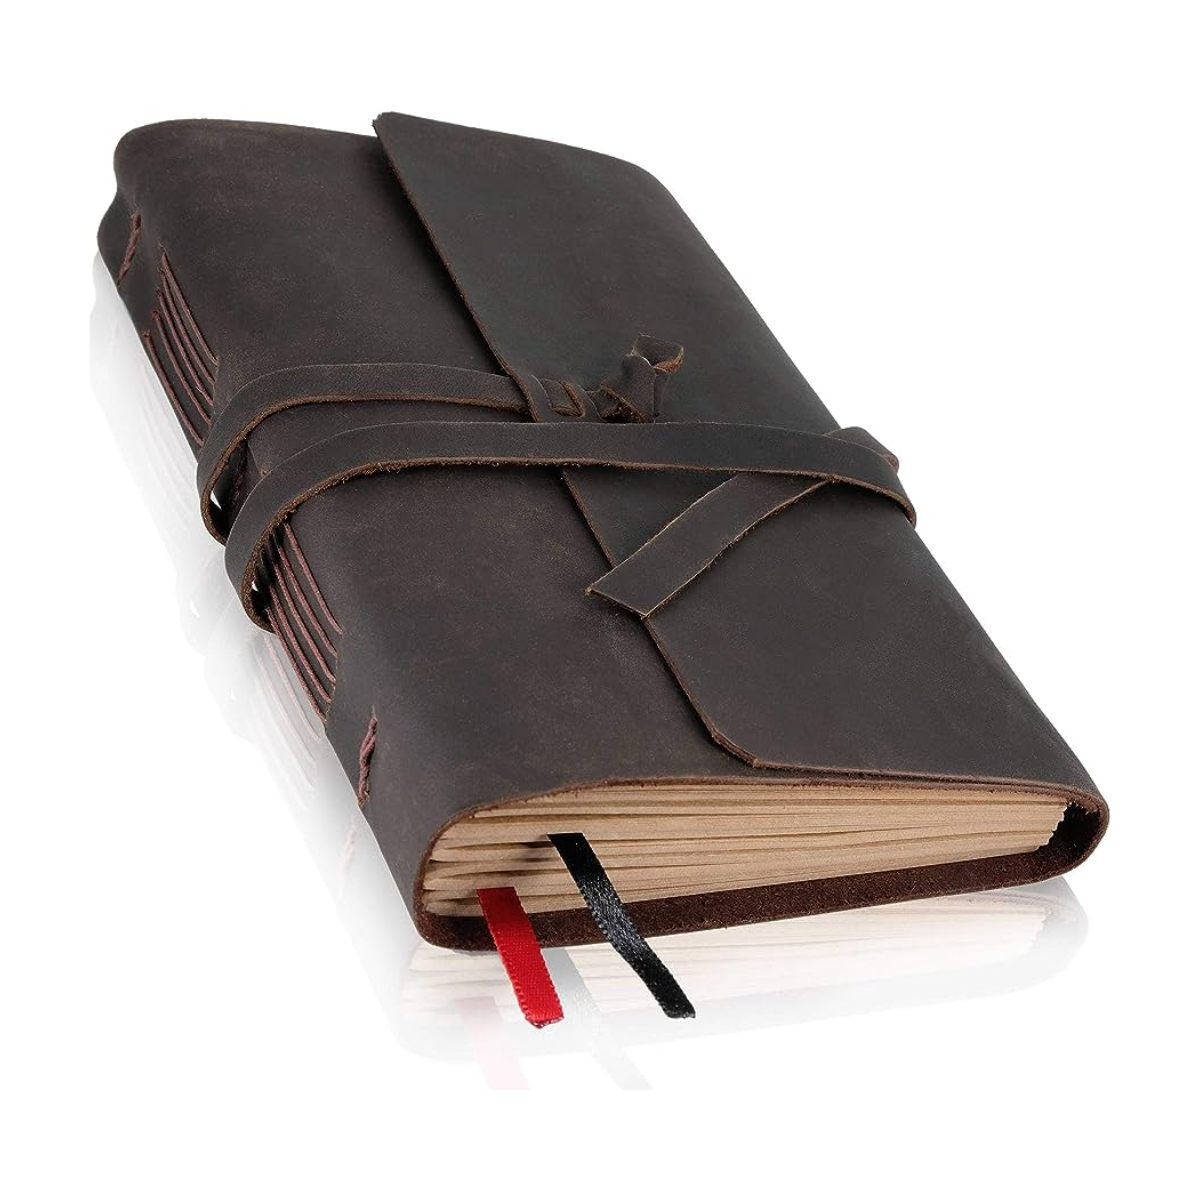 26. Timeless Elegance: Capture His Thoughts with a Personalized Leather Bound Journal